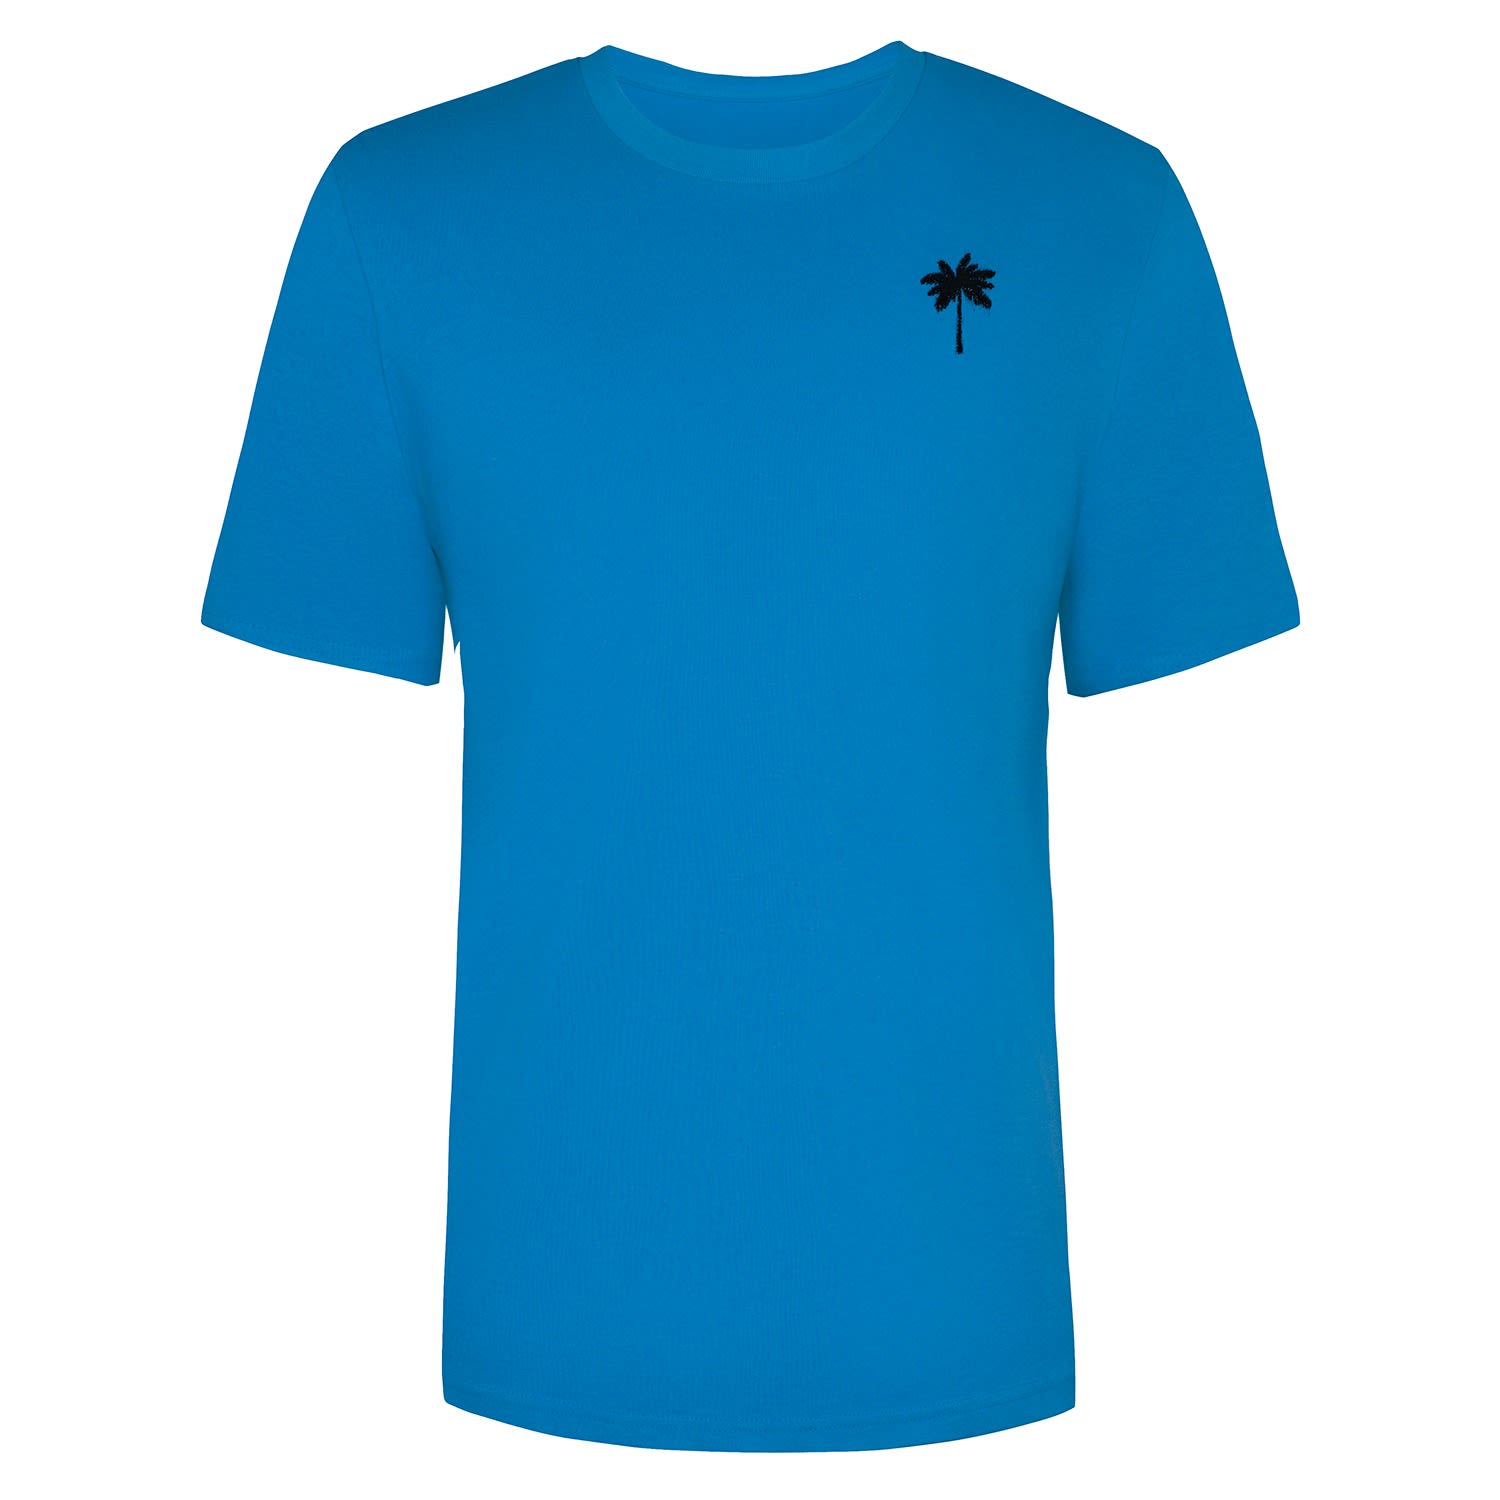 Embroidered palm T-shirt Comfort fit, Le 31, Shop Men's Printed &  Patterned T-Shirts Online